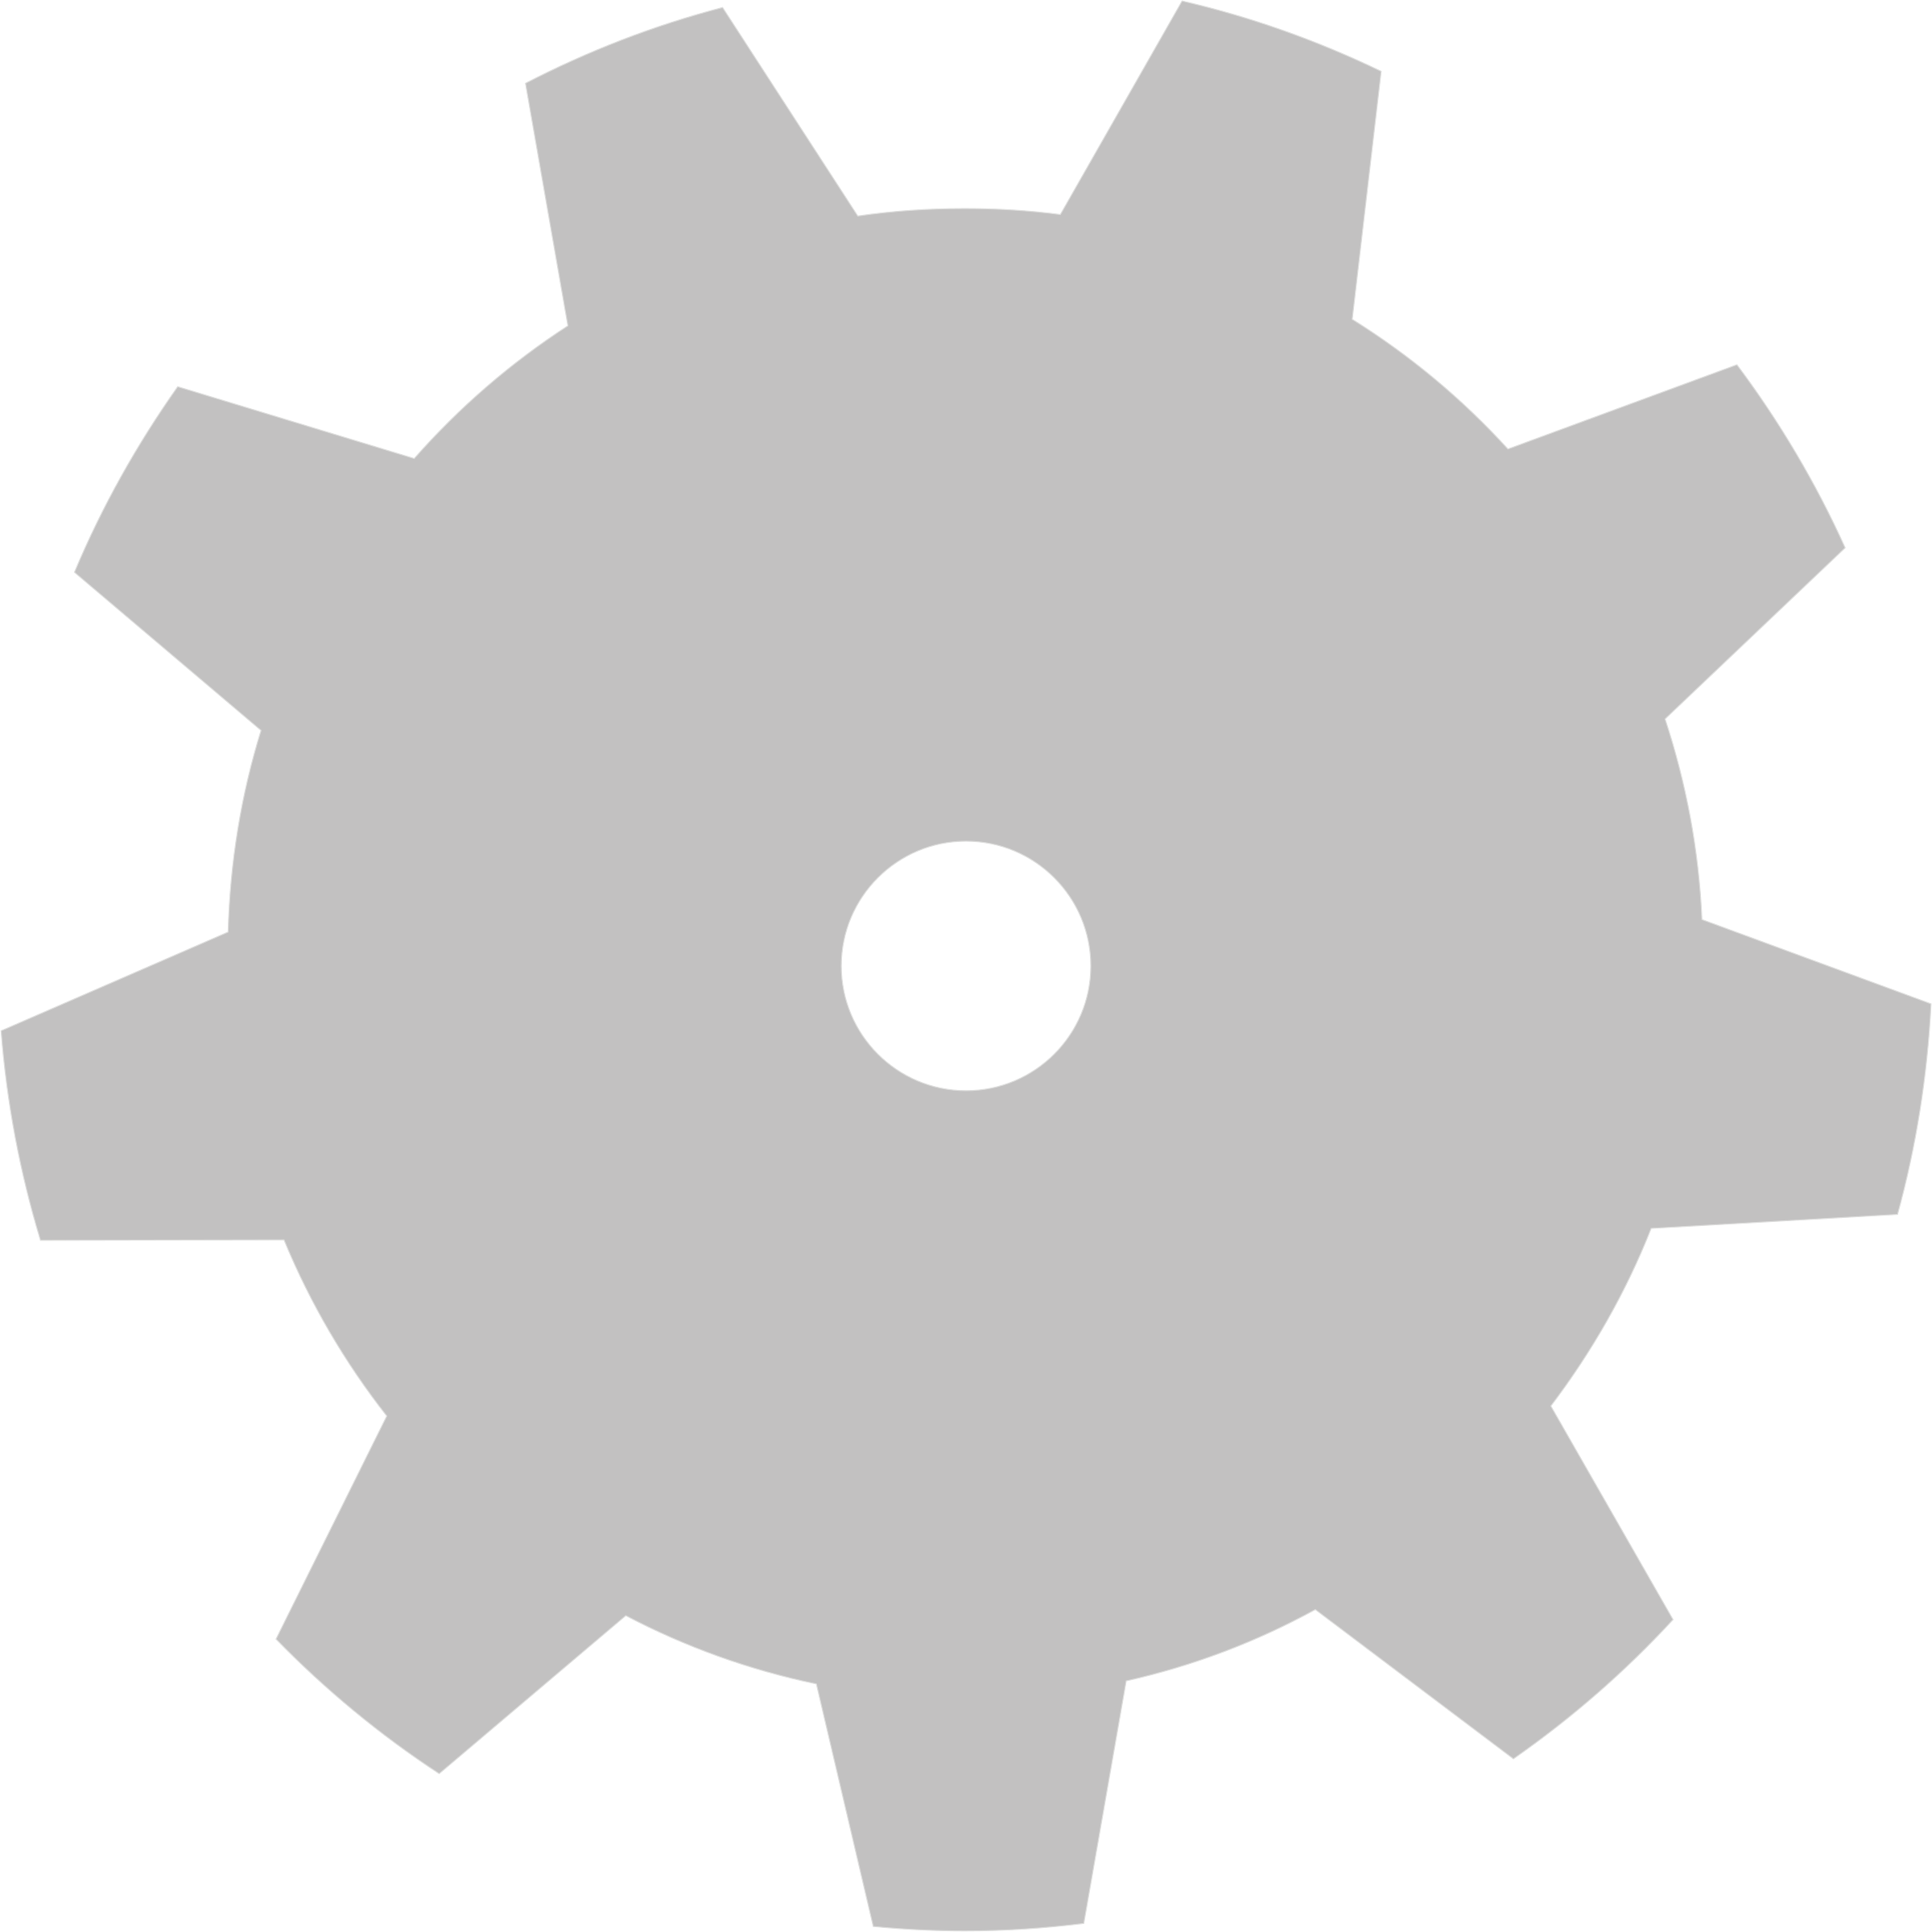 Gear clipart gray, Gear gray Transparent FREE for download